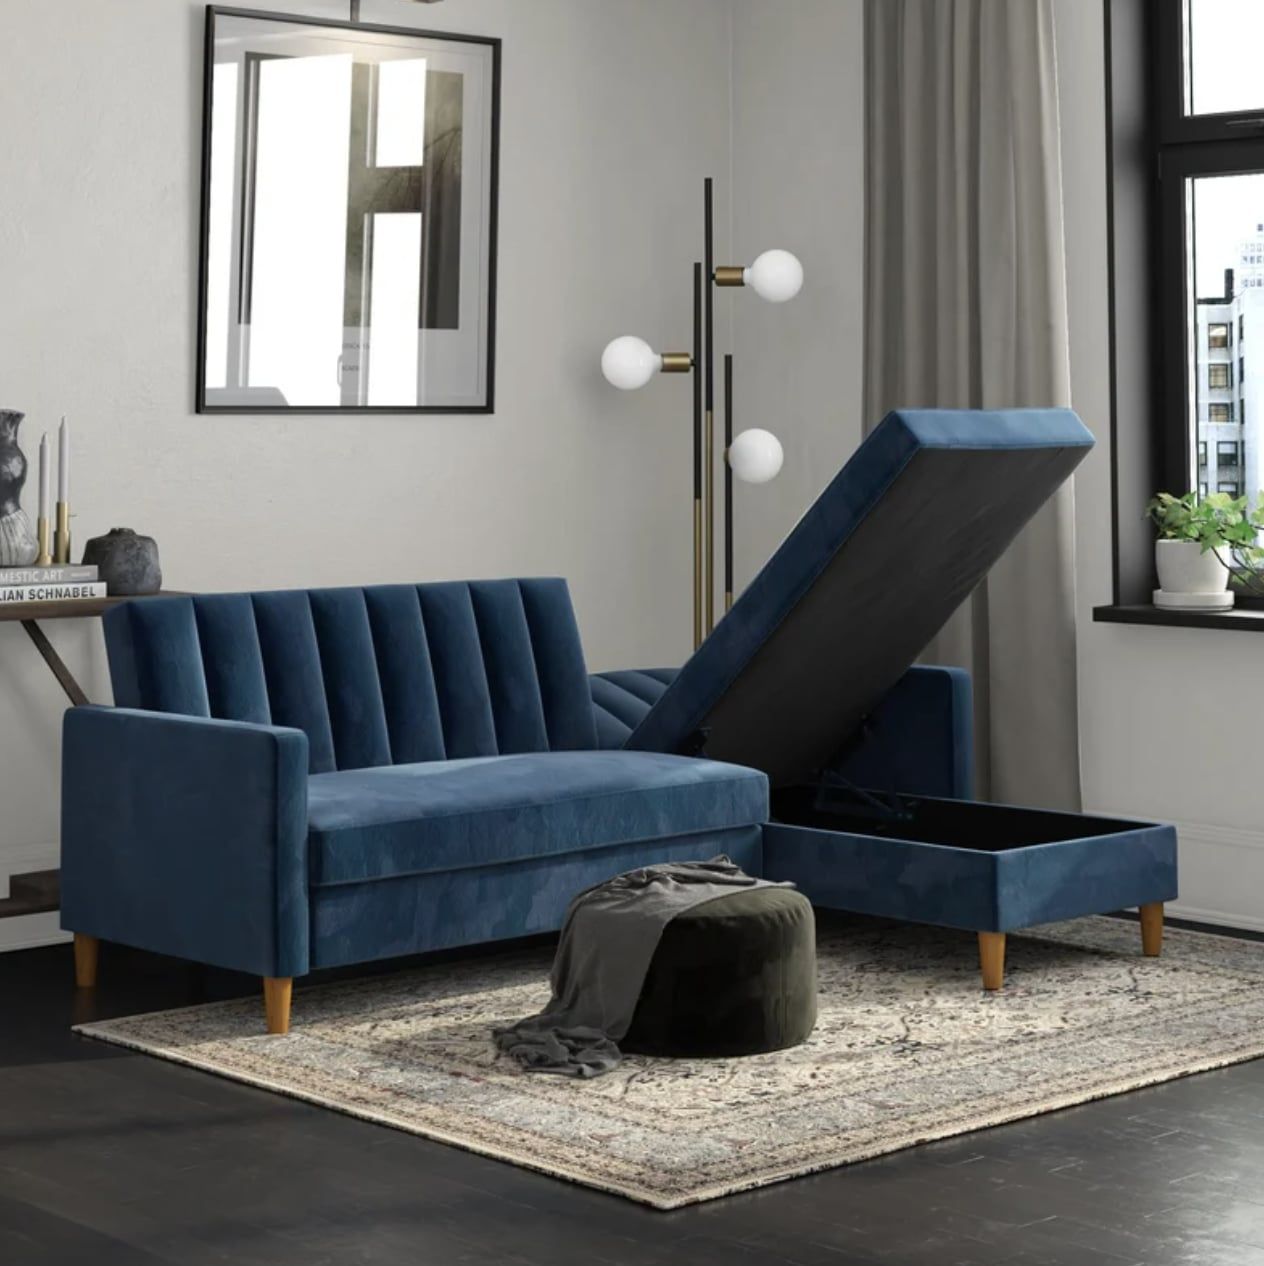 Best And Most Comfortable Sofas With Storage 2022 | Popsugar Home With Regard To Convertible Sofa With Matching Chaise (View 6 of 15)